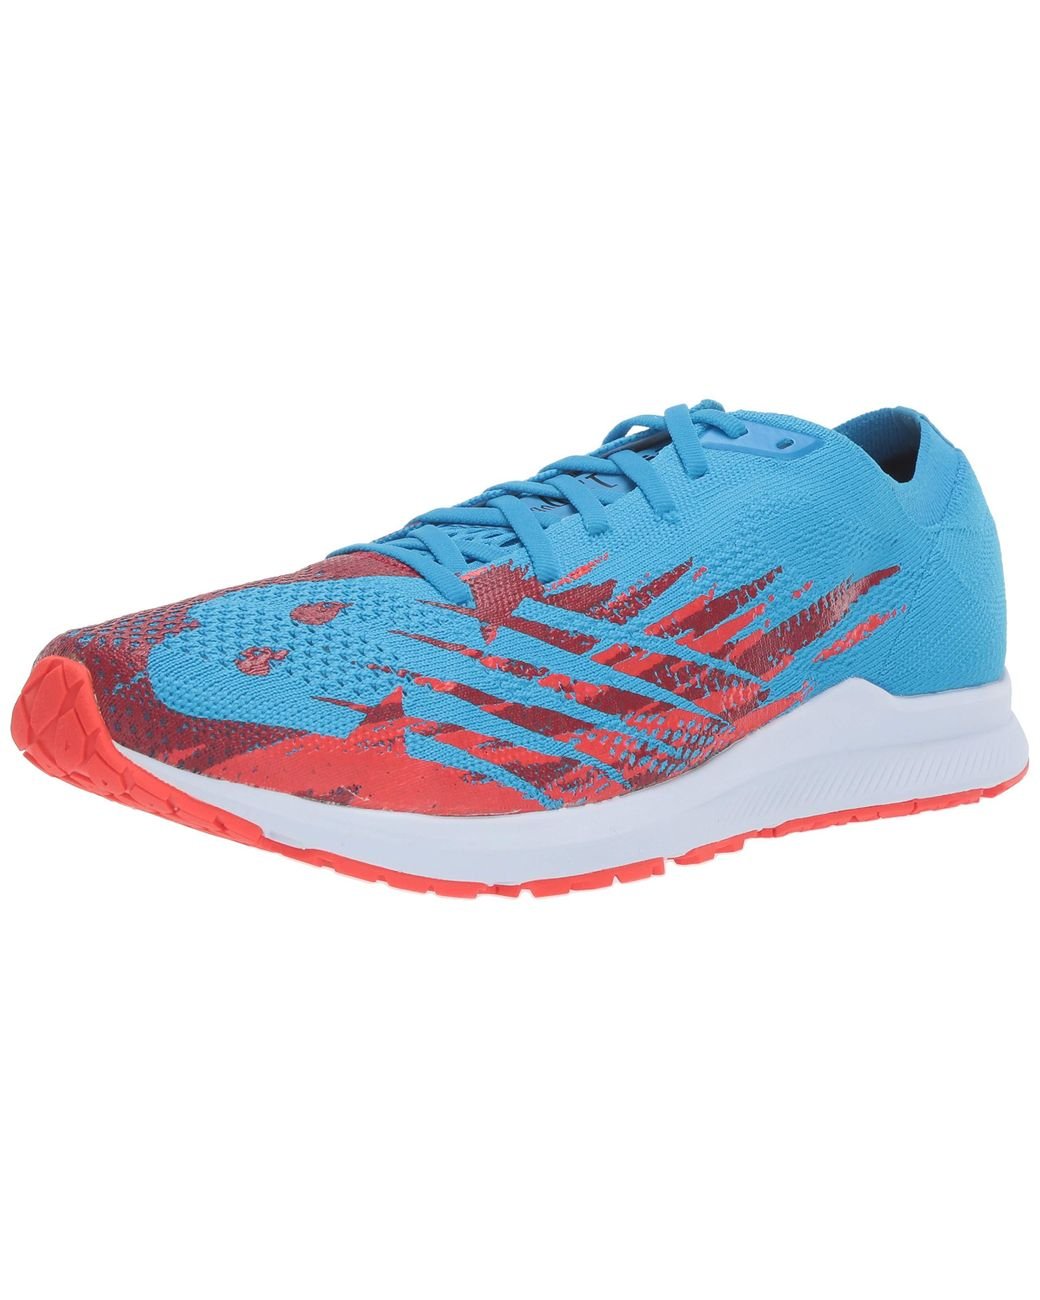 New Balance Synthetic 1500 V6 Running Shoe in Blue for Men - Save 37% - Lyst